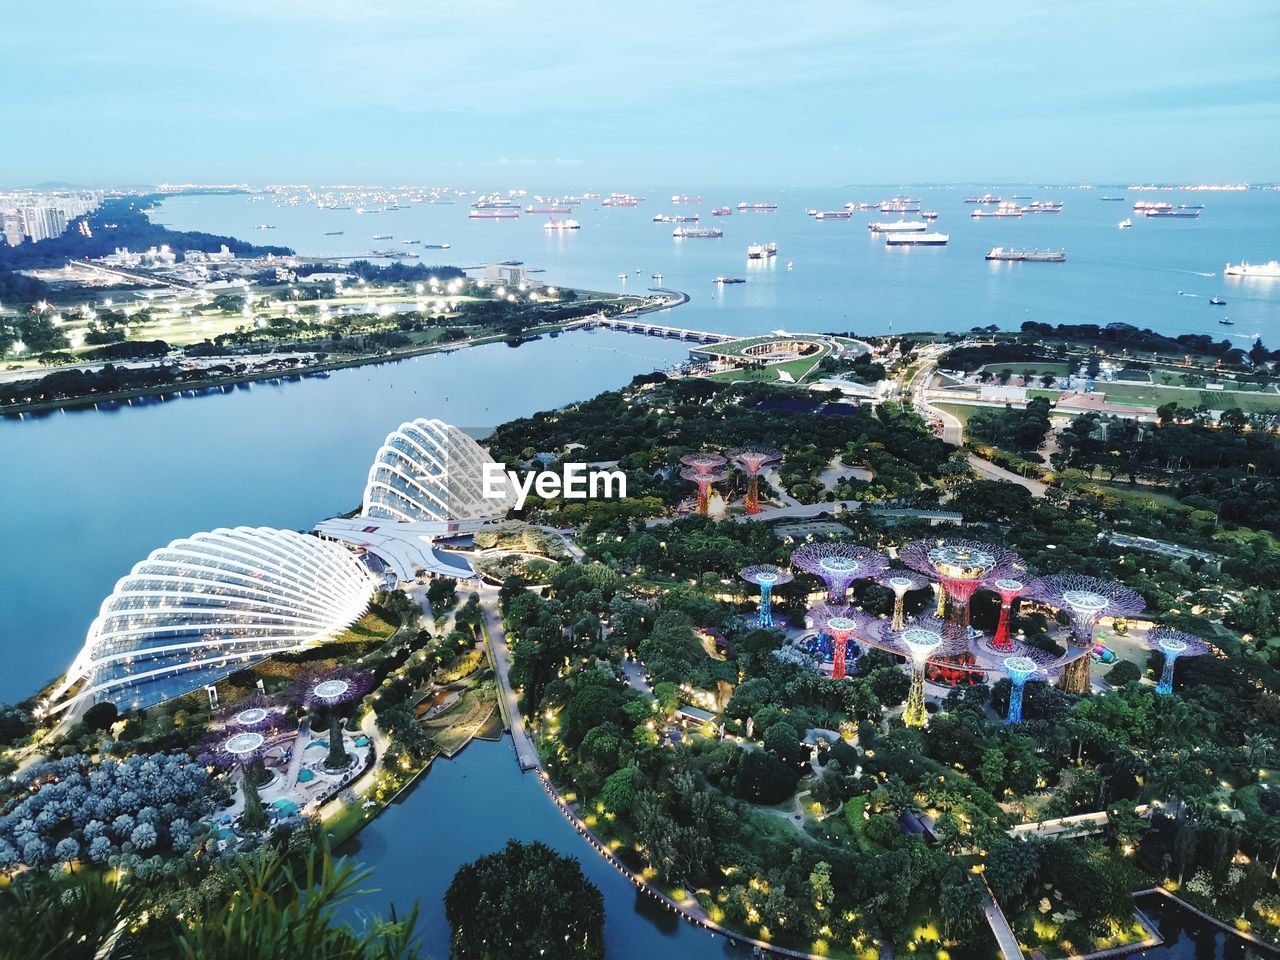 Singapore's gardens by the bay at dusk